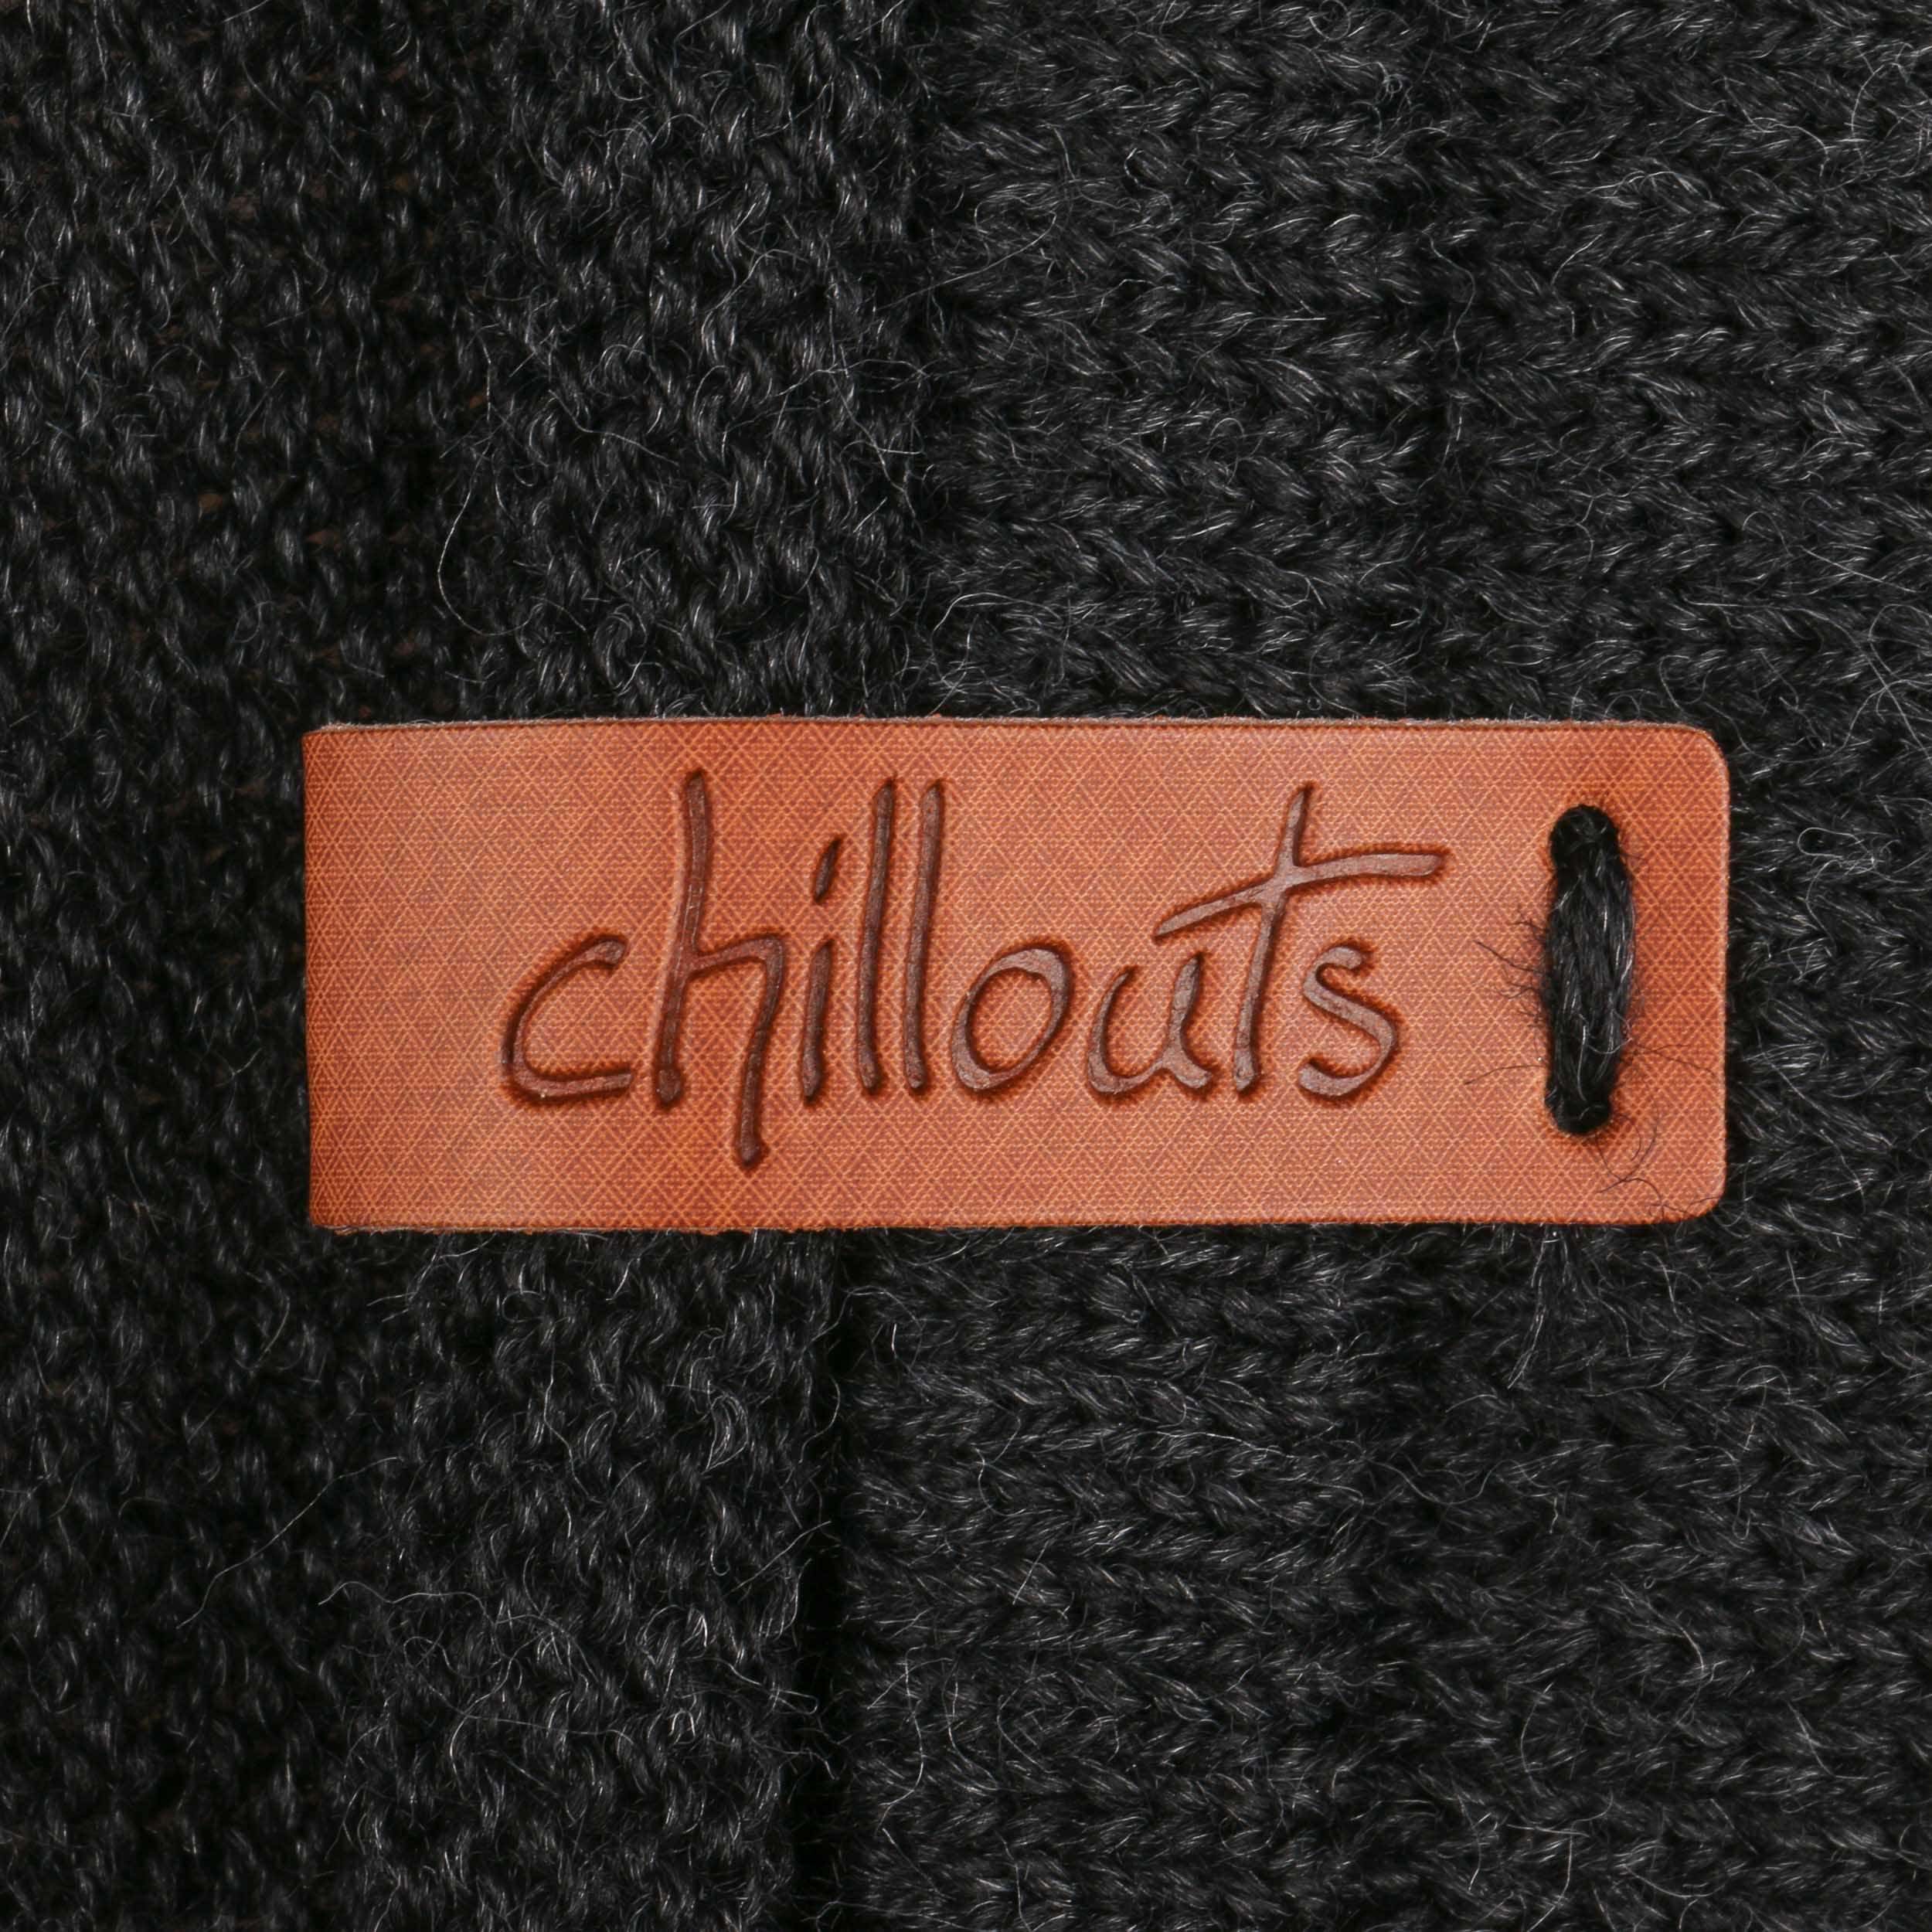 - Beanie Chillouts 29,95 € Leicester Oversize by